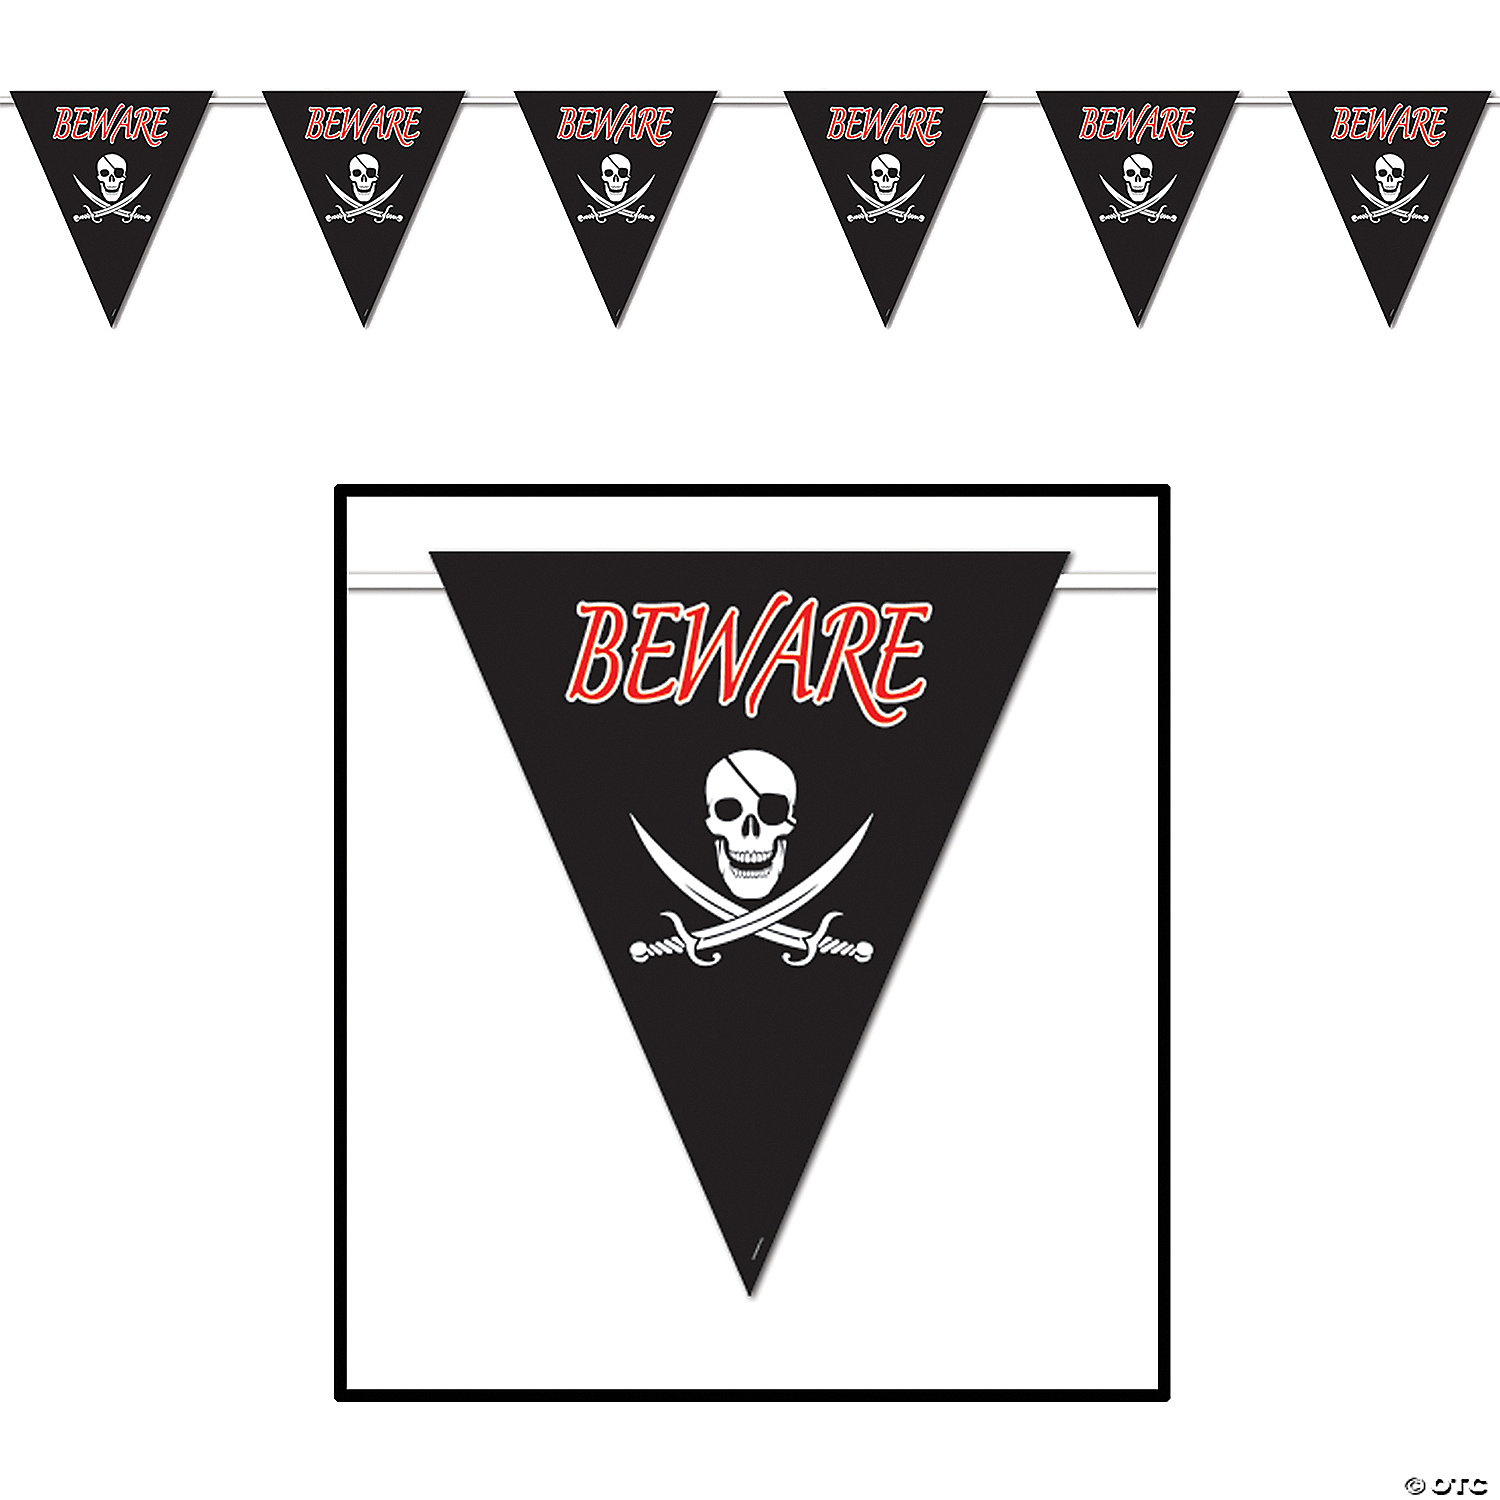 BEWARE OF PIRATES GIANT PENNANT BANNER - HALLOWEEN